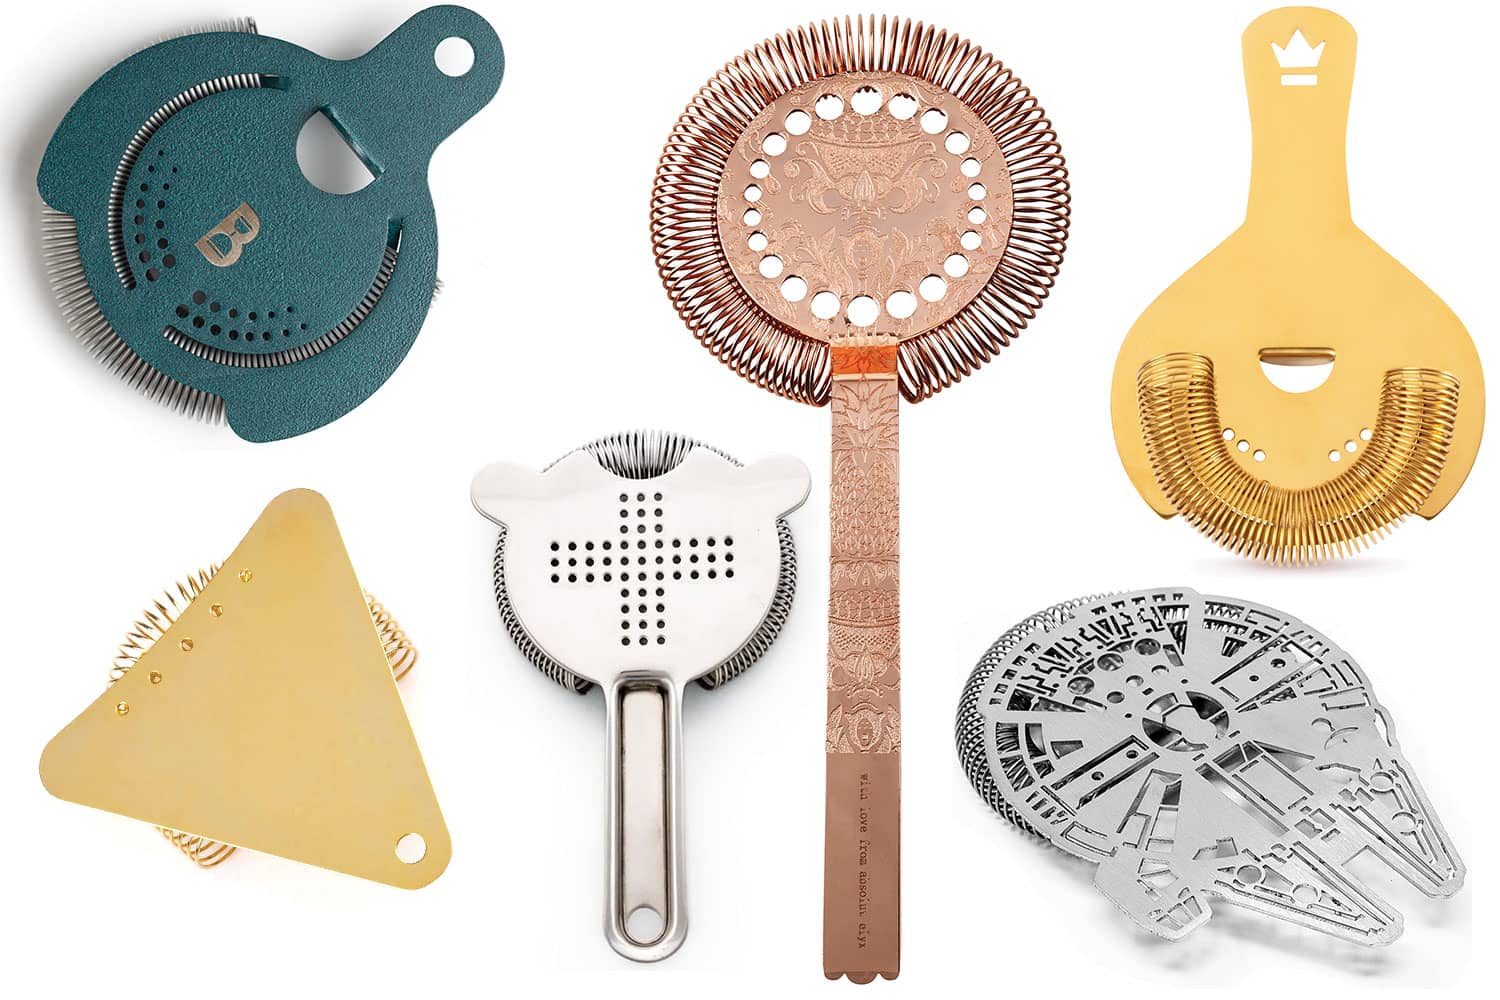 Statement cocktail strainers